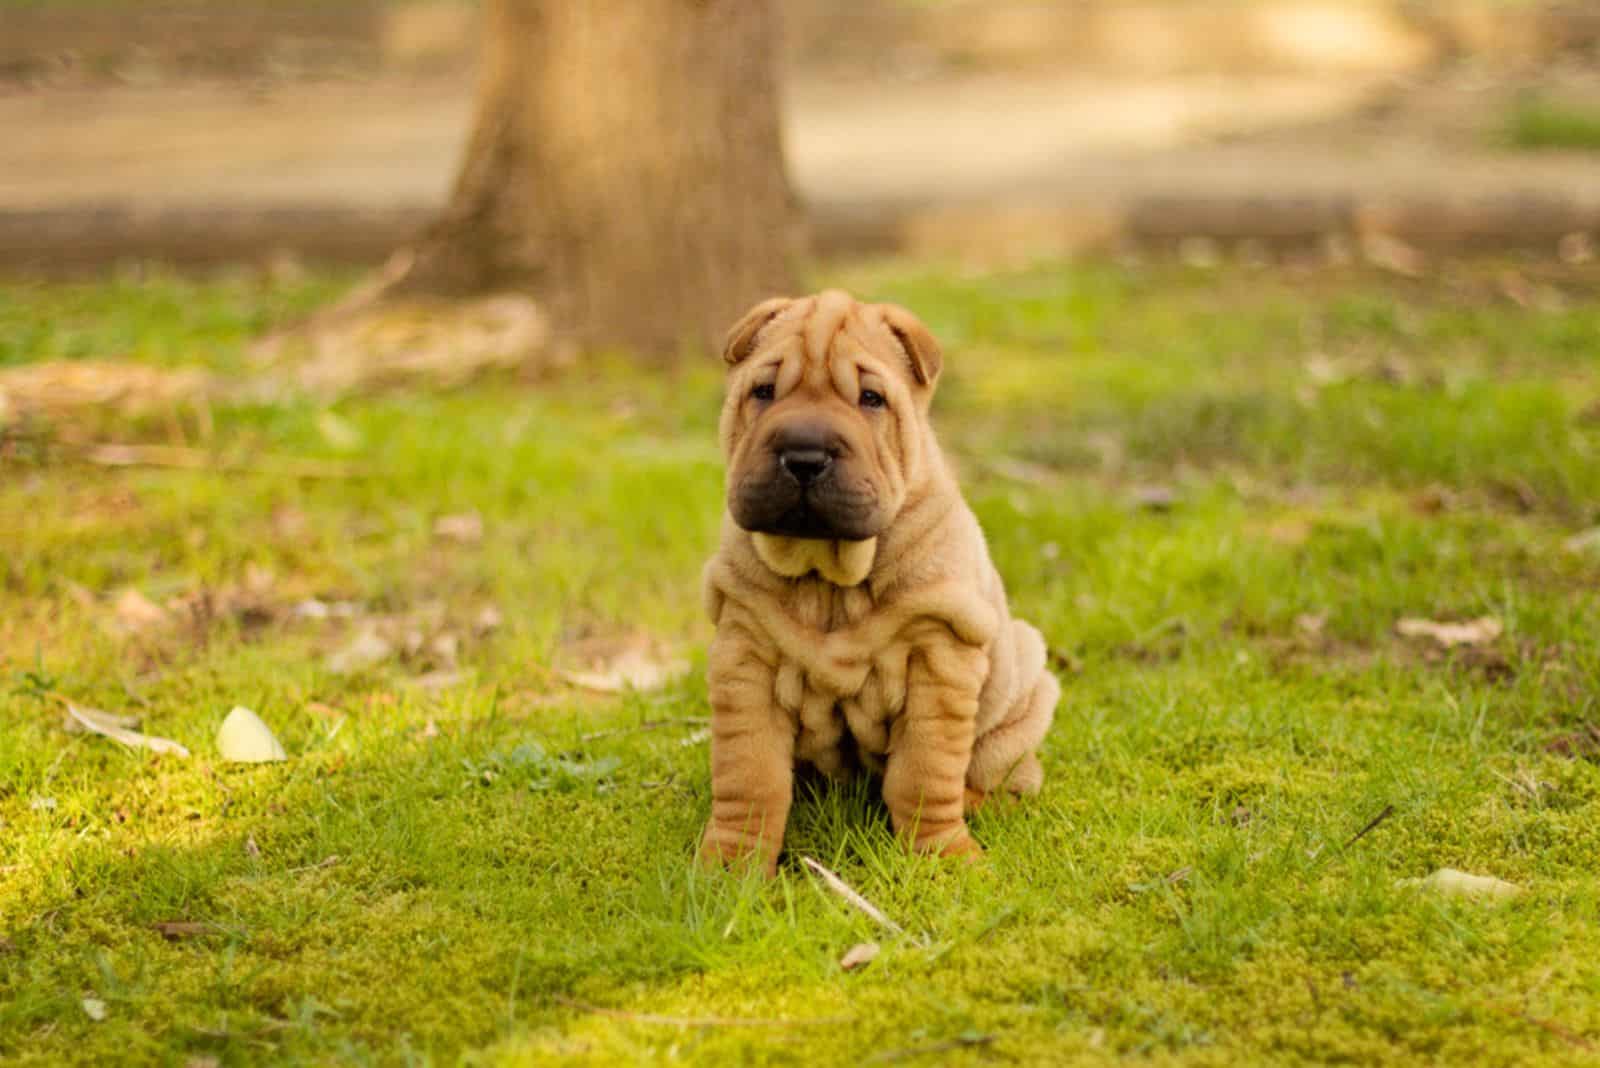 The Miniature Shar Pei: Wrinkles That Captured The World